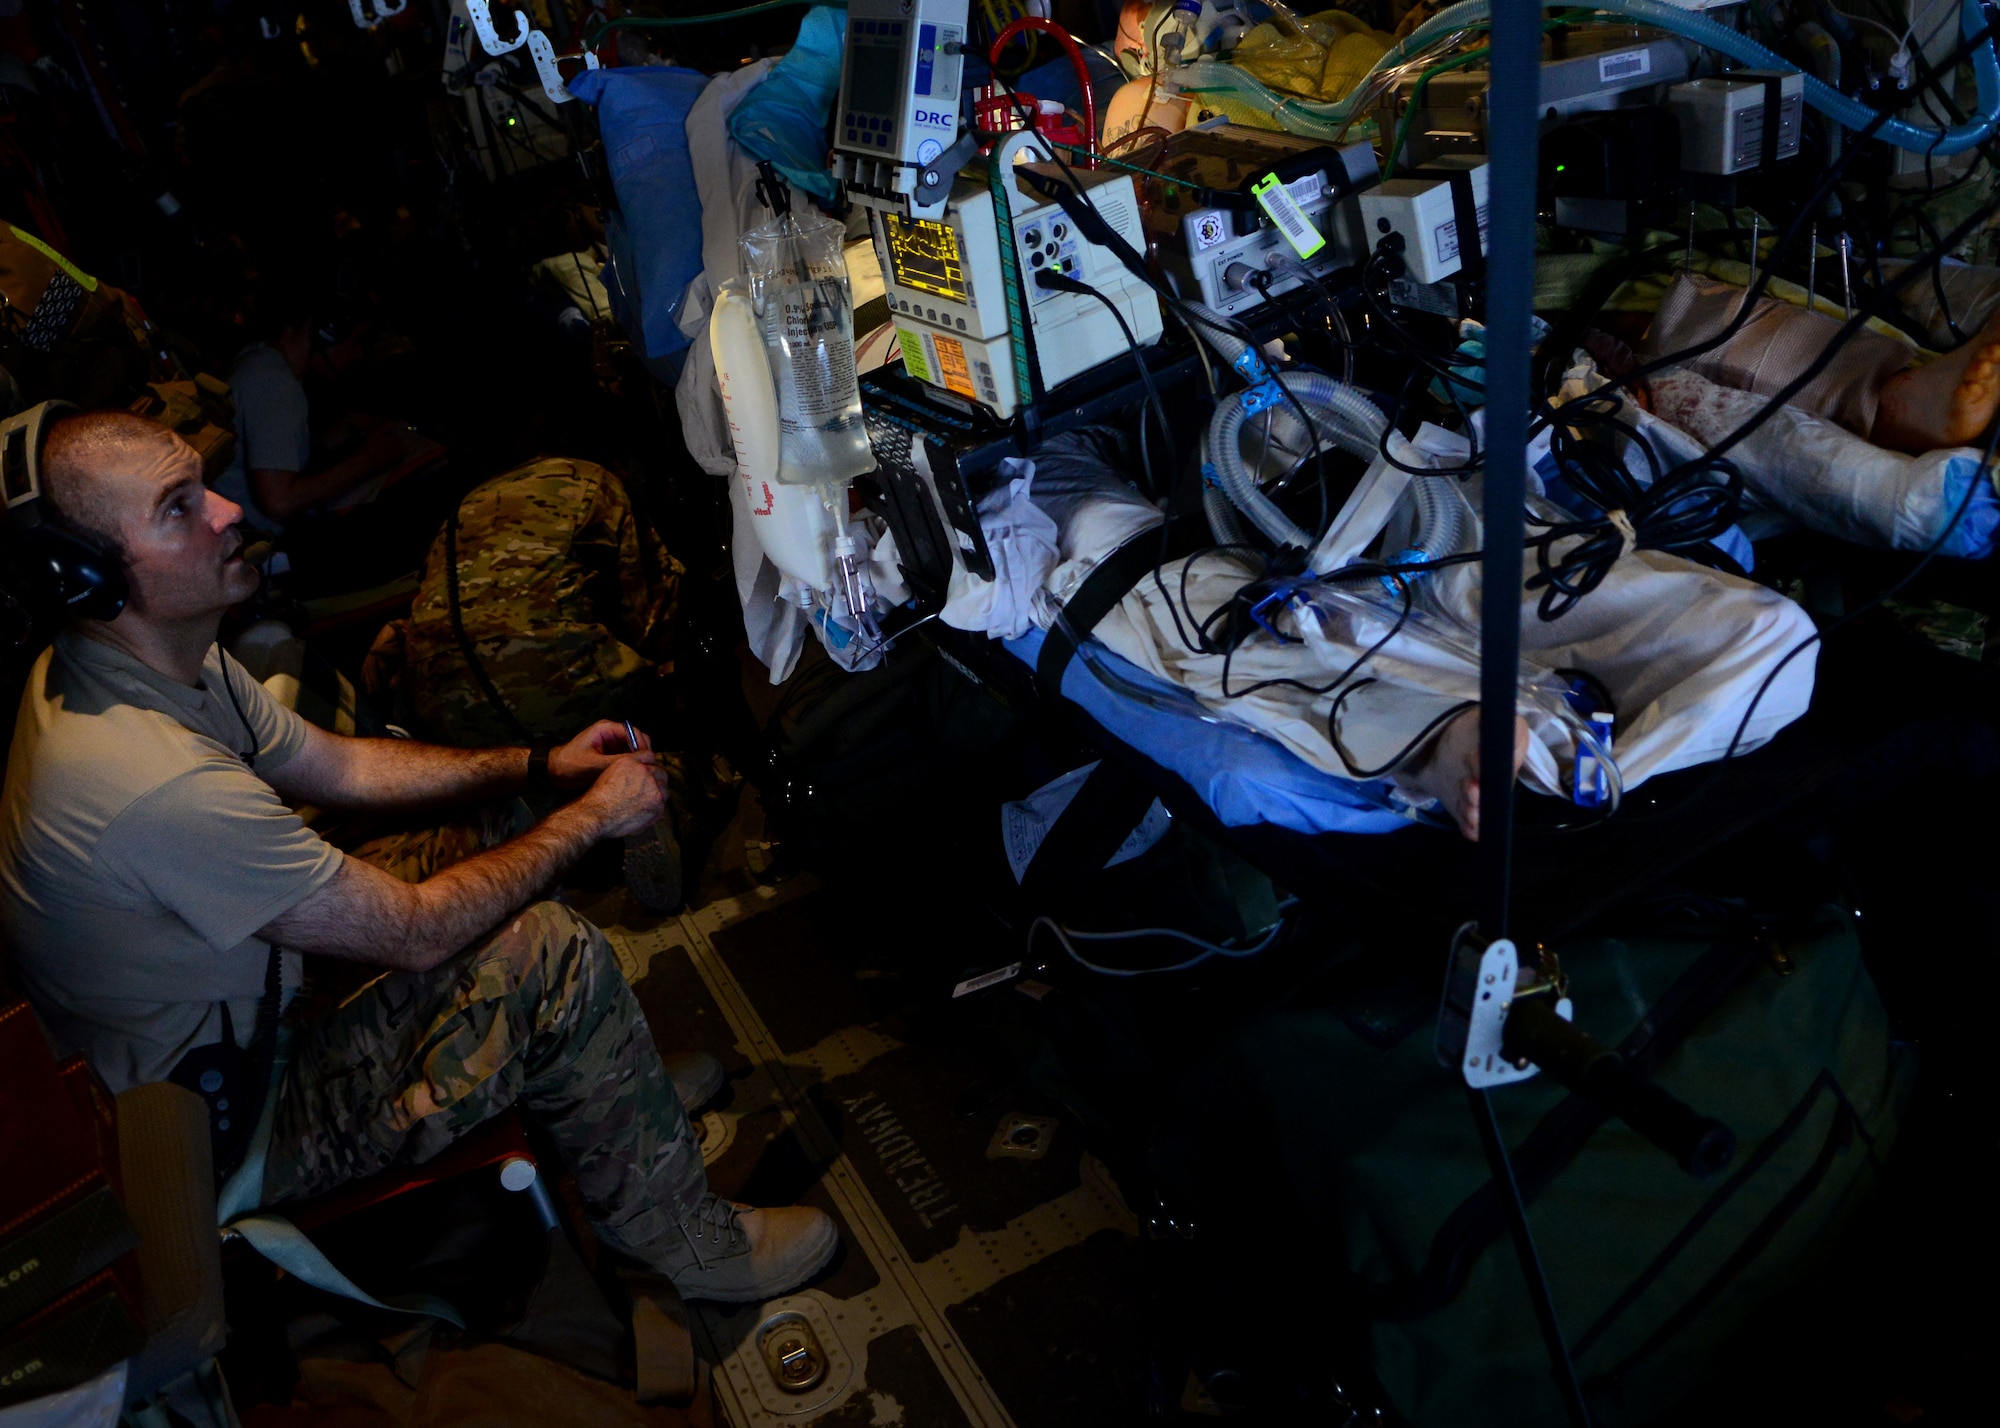 U.S. Air Force Capt. Nathan Buck, 455th Expeditionary Aeromedical Evacuation Squadron Critical Care Air Transport Team medical provider, watches a patient during a flight to Bagram Airfield, Afghanistan, May 29, 2014. (U.S. Air Force photo by Staff Sgt. Evelyn Chavez)